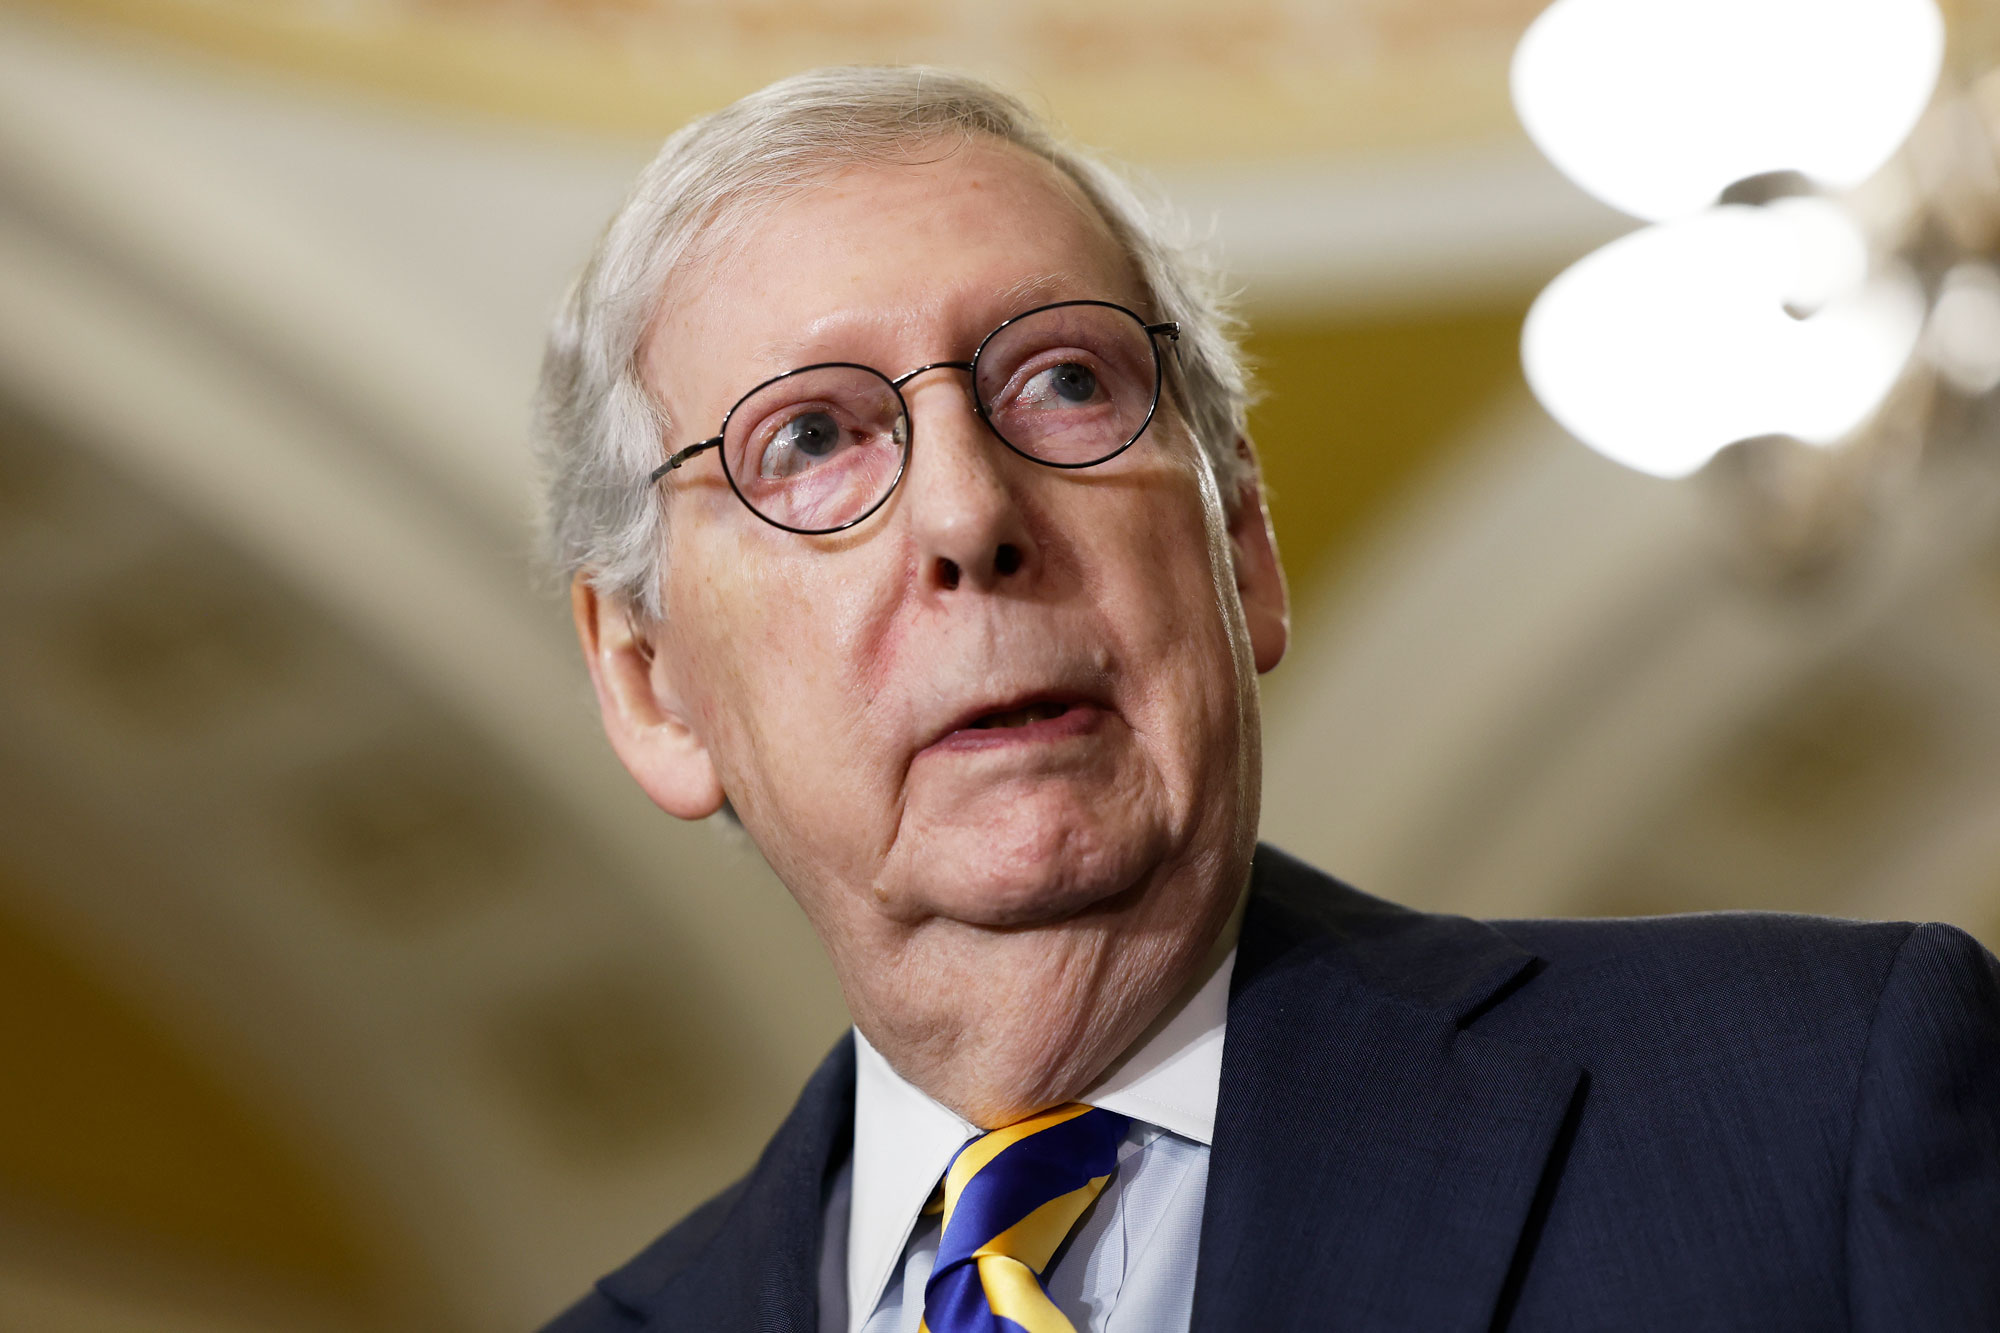 republicans-turn-against-mitch-mcconnell-after-he-freezes-mid-question